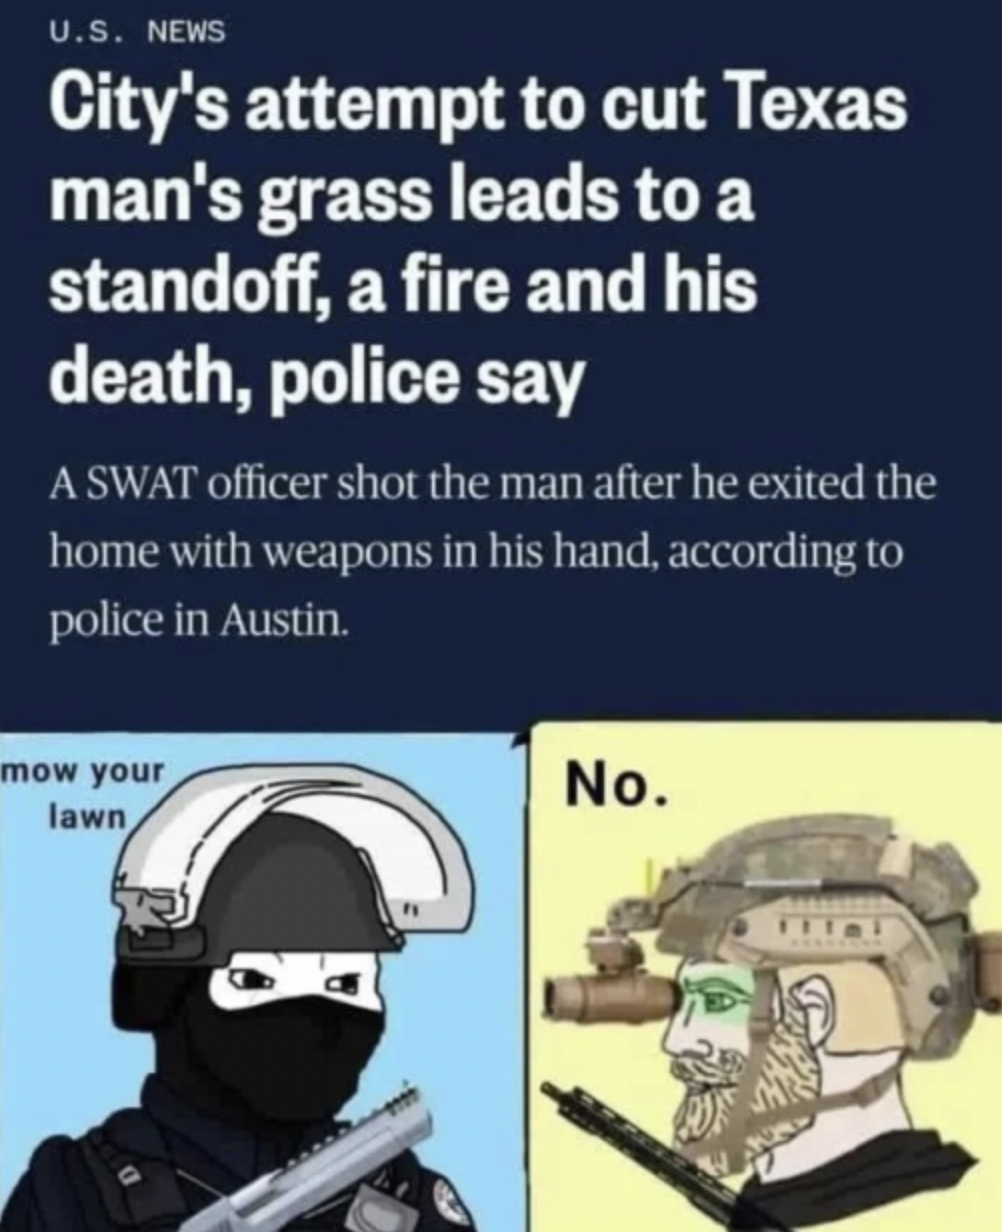 Face-Plants and Fails - become ungovernable memes - U.S. News City's attempt to cut Texas man's grass leads to a standoff, a fire and his death, police say A Swat officer shot the man after he exited the home with weapons in his hand, according to police